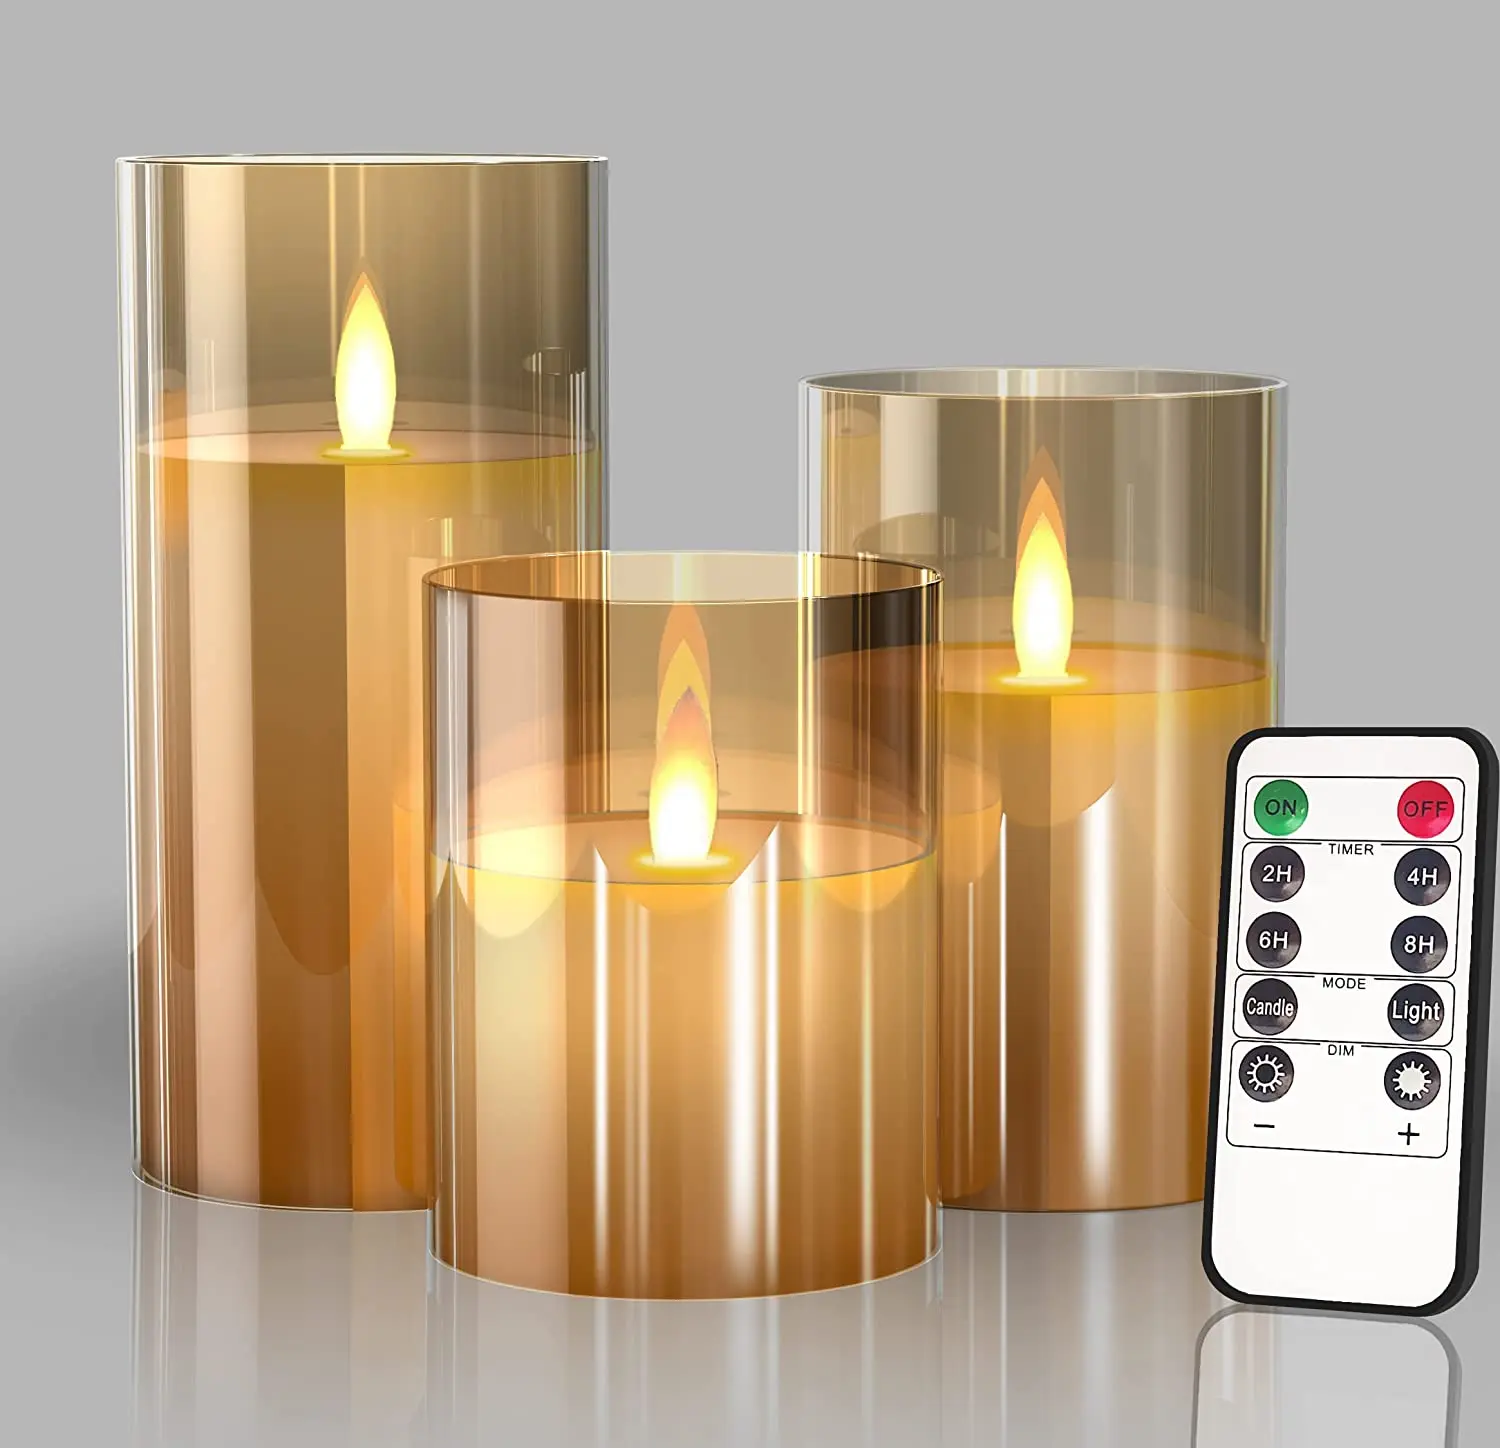 3pcs Glass Battery Operated LED Flameless Candles with Remote Timer, Warm Color Flickering Light for Festival Wedding Home Party